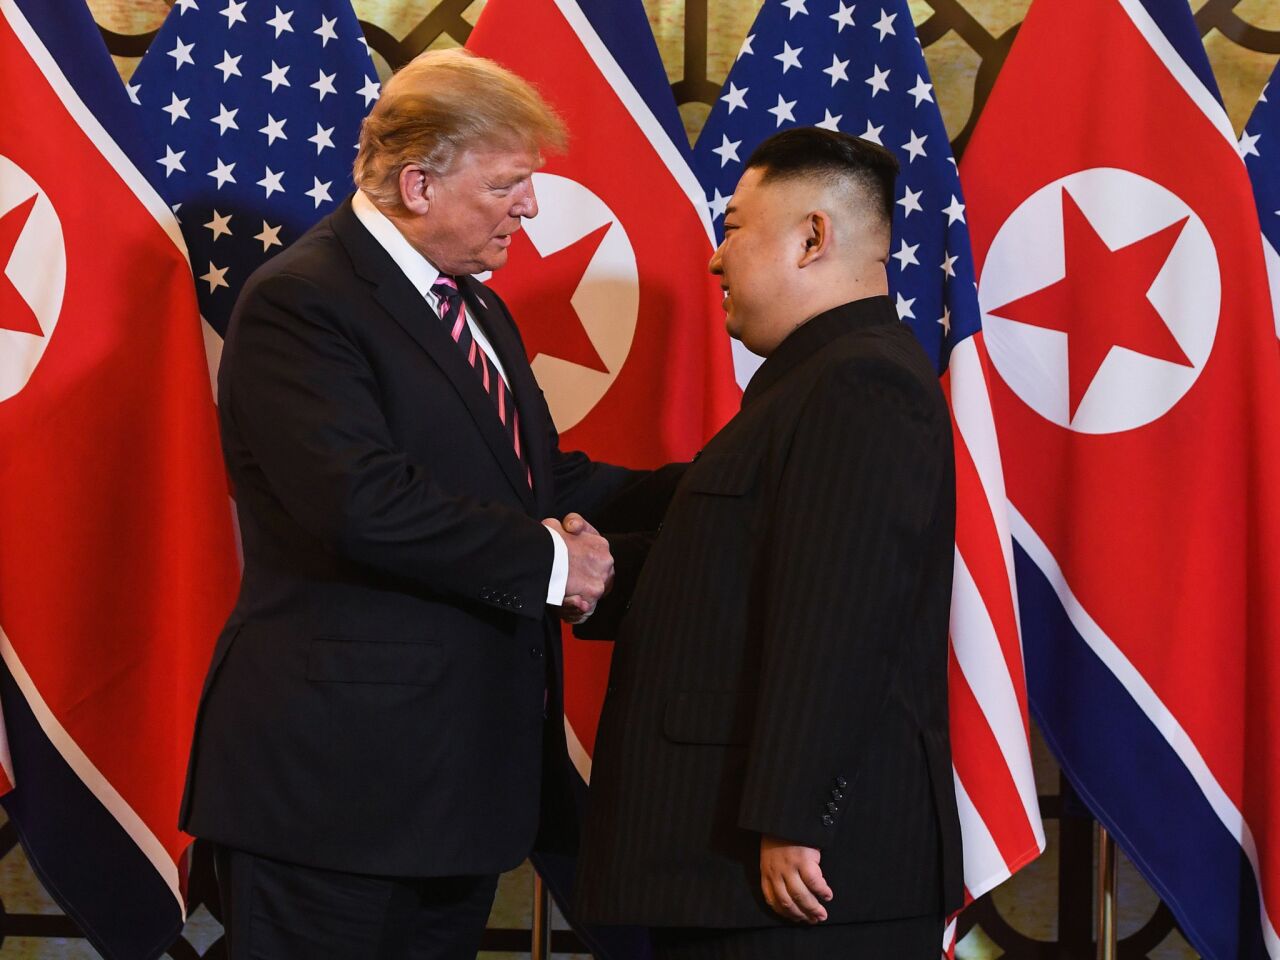 President Trump shakes hands with North Korean leader Kim Jong Un before a meeting Feb. 27 at the Sofitel Legend Metropole hotel in Hanoi.